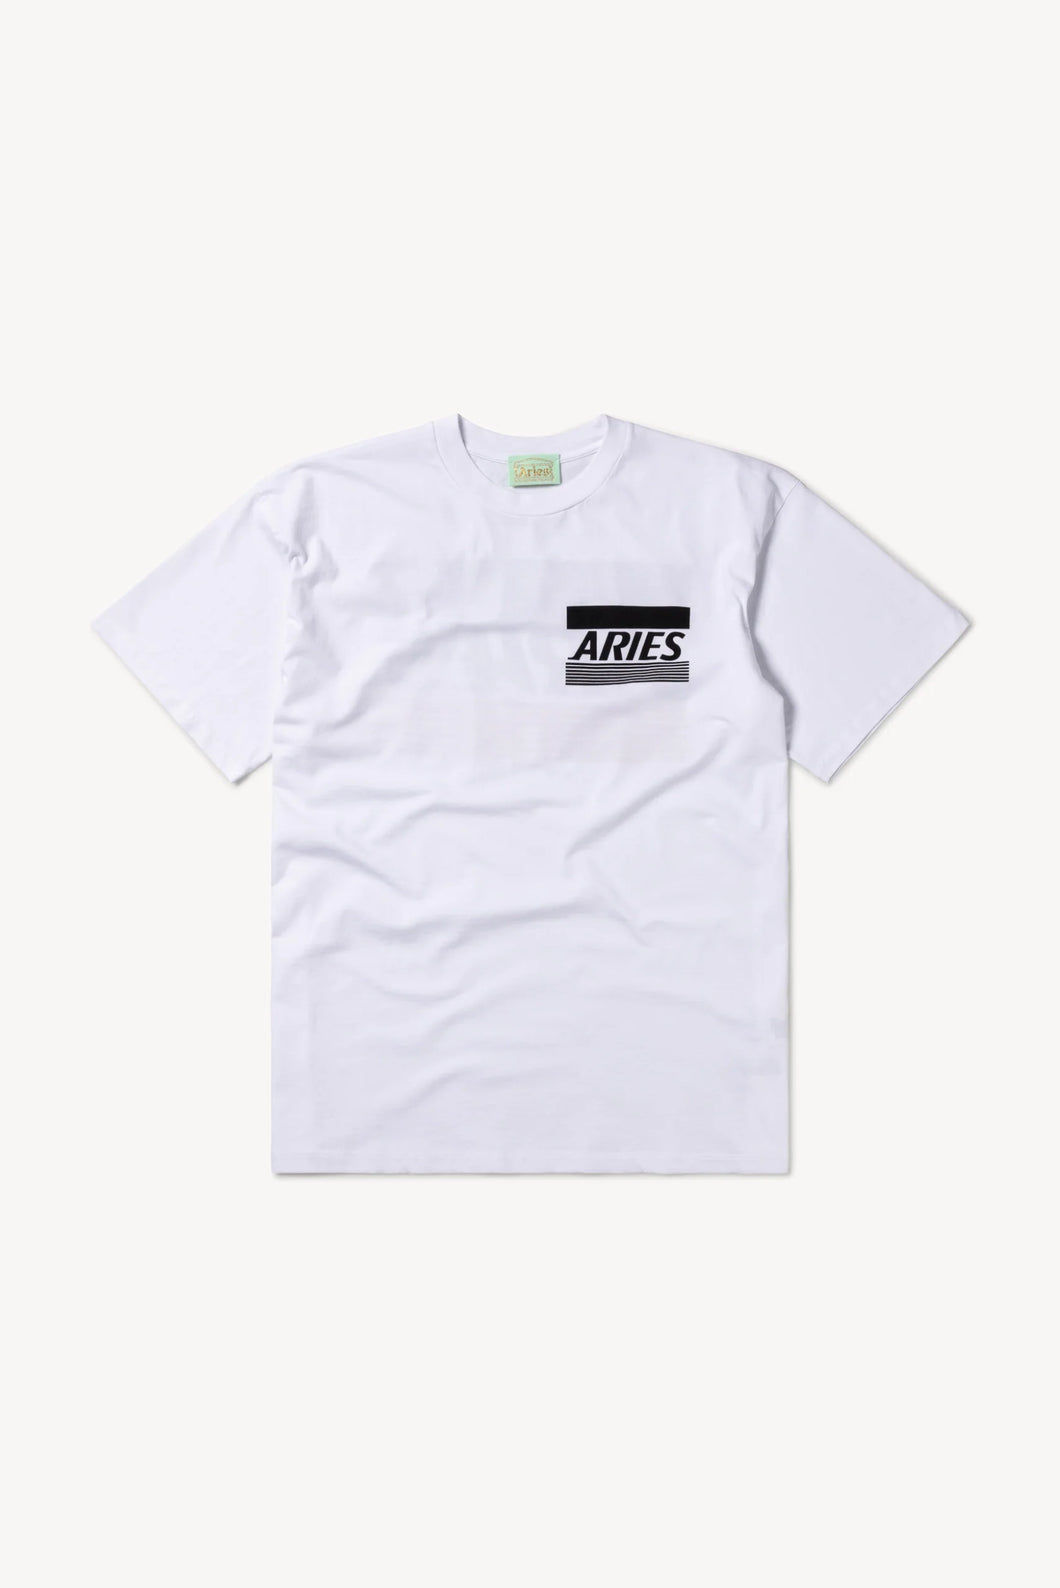 Aries Credit Card SS Tee White